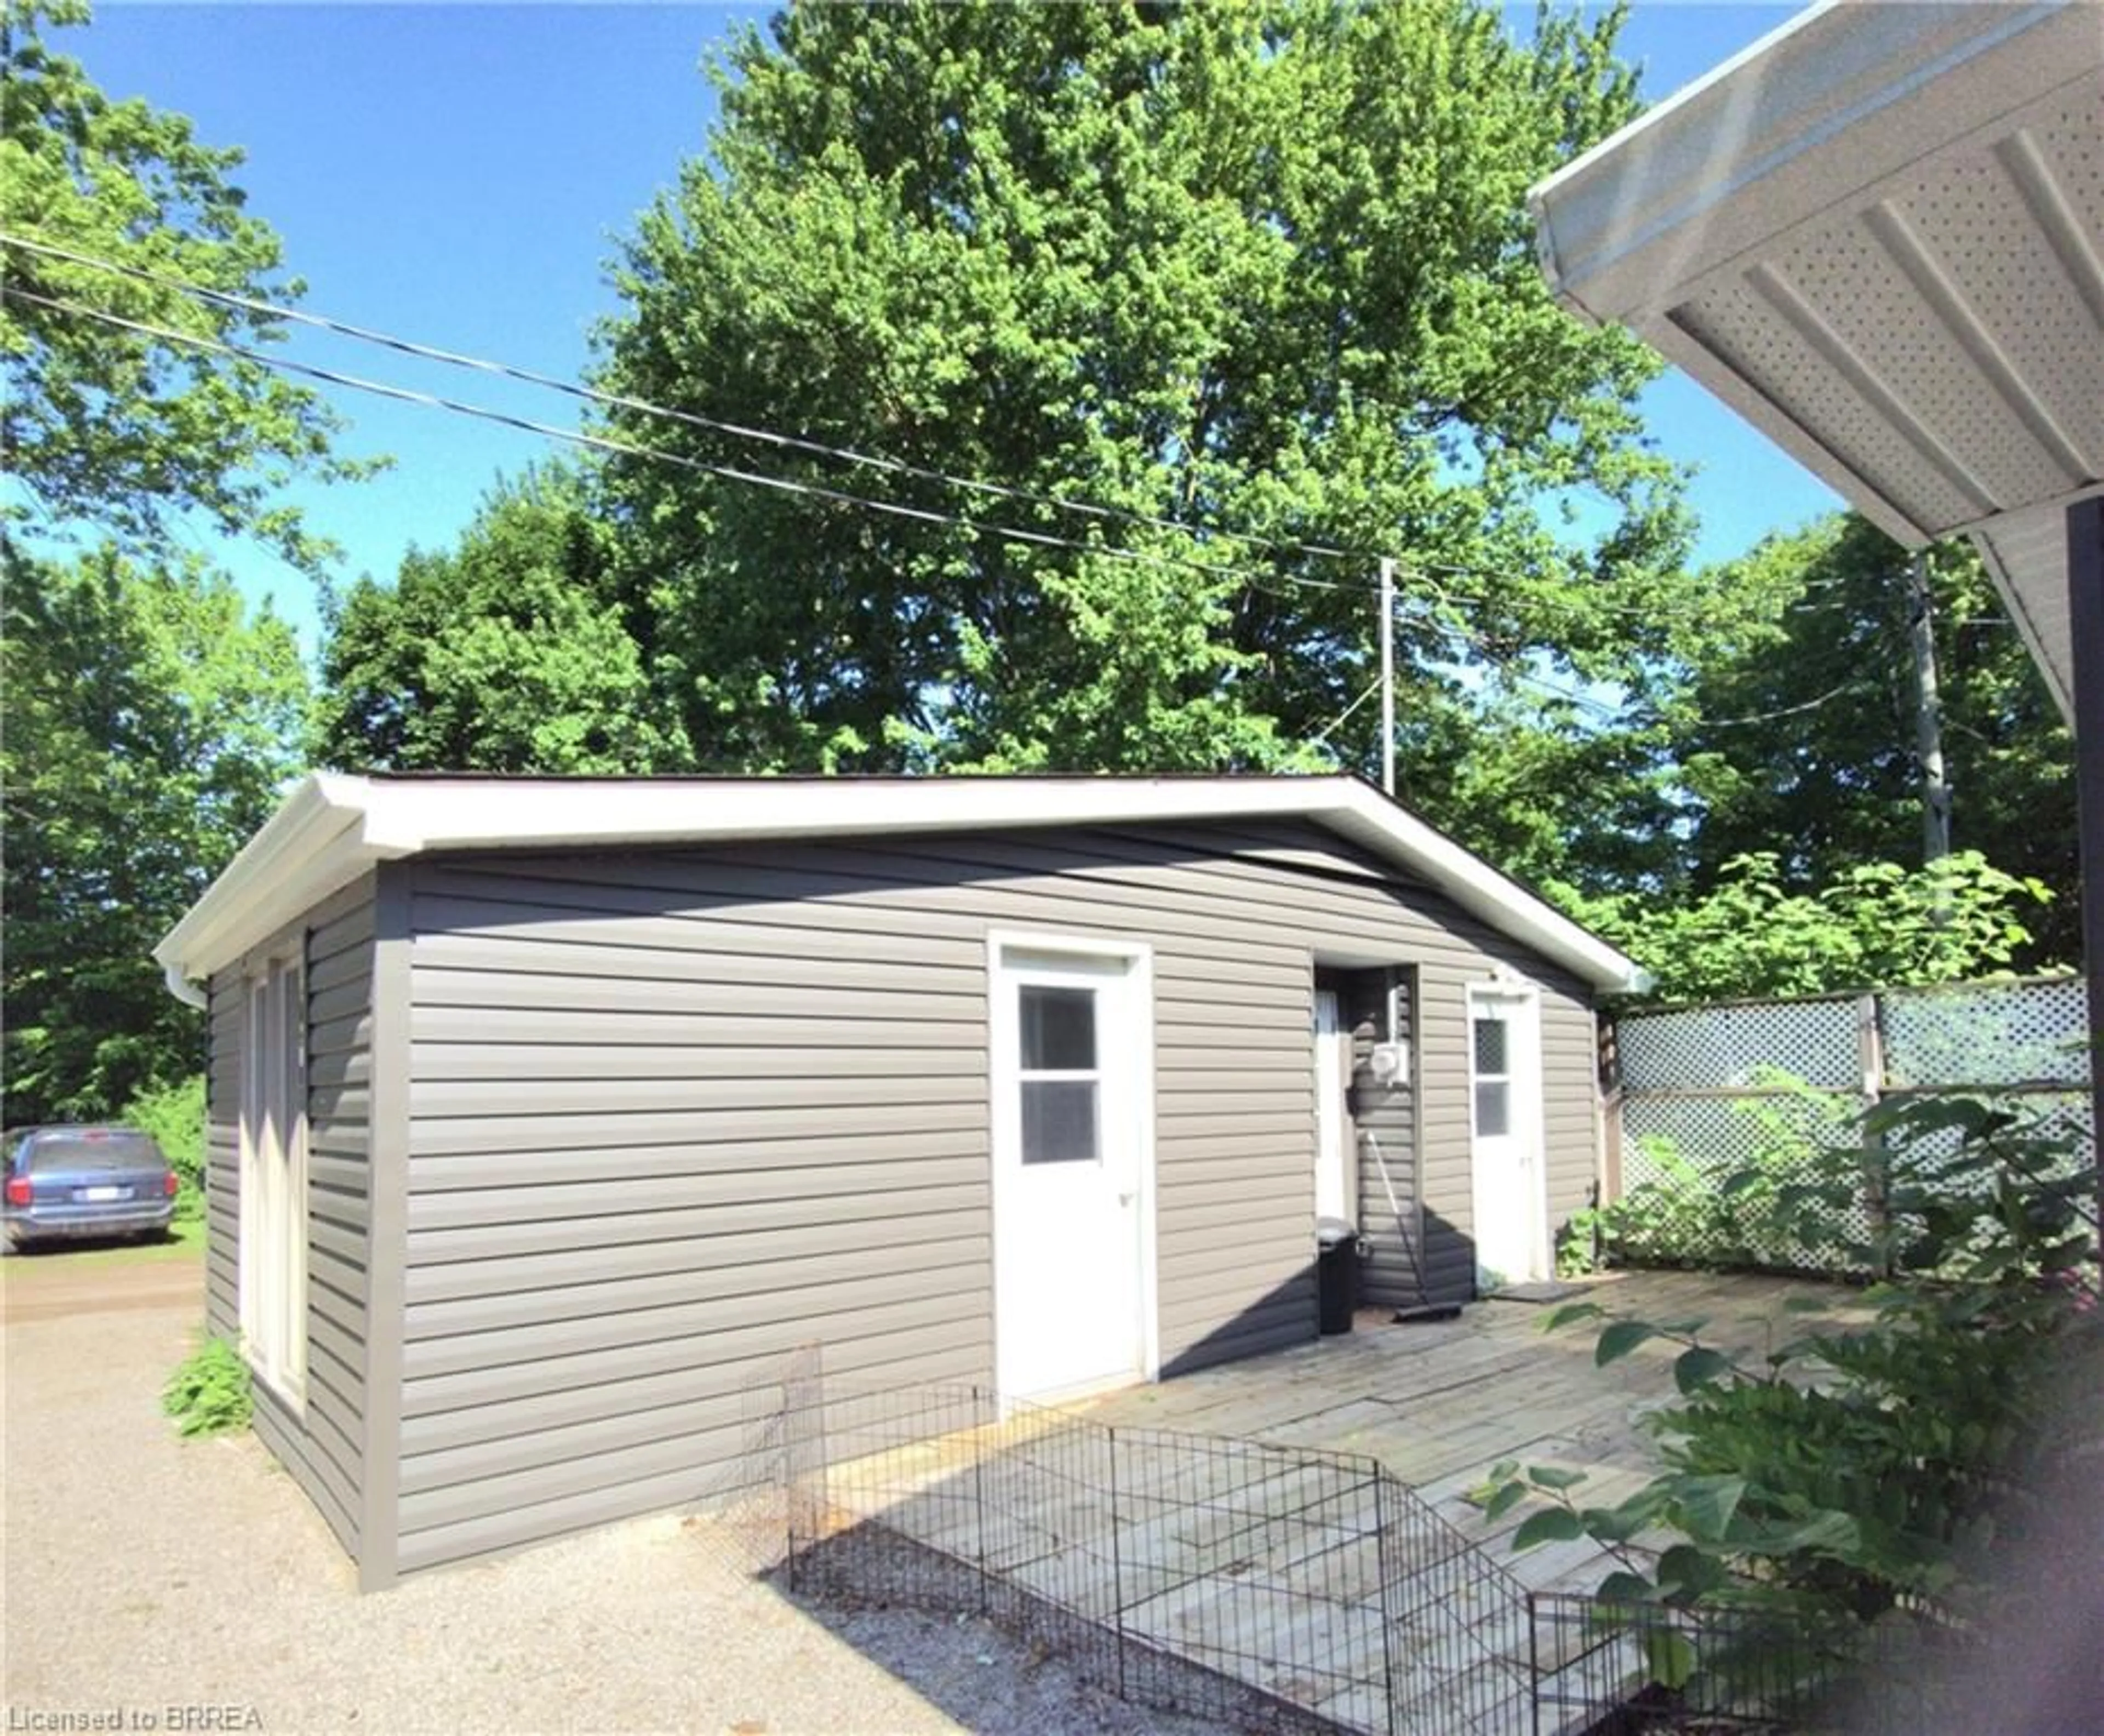 Shed for 7 Pepper Rd, Freelton Ontario L0R 1K0